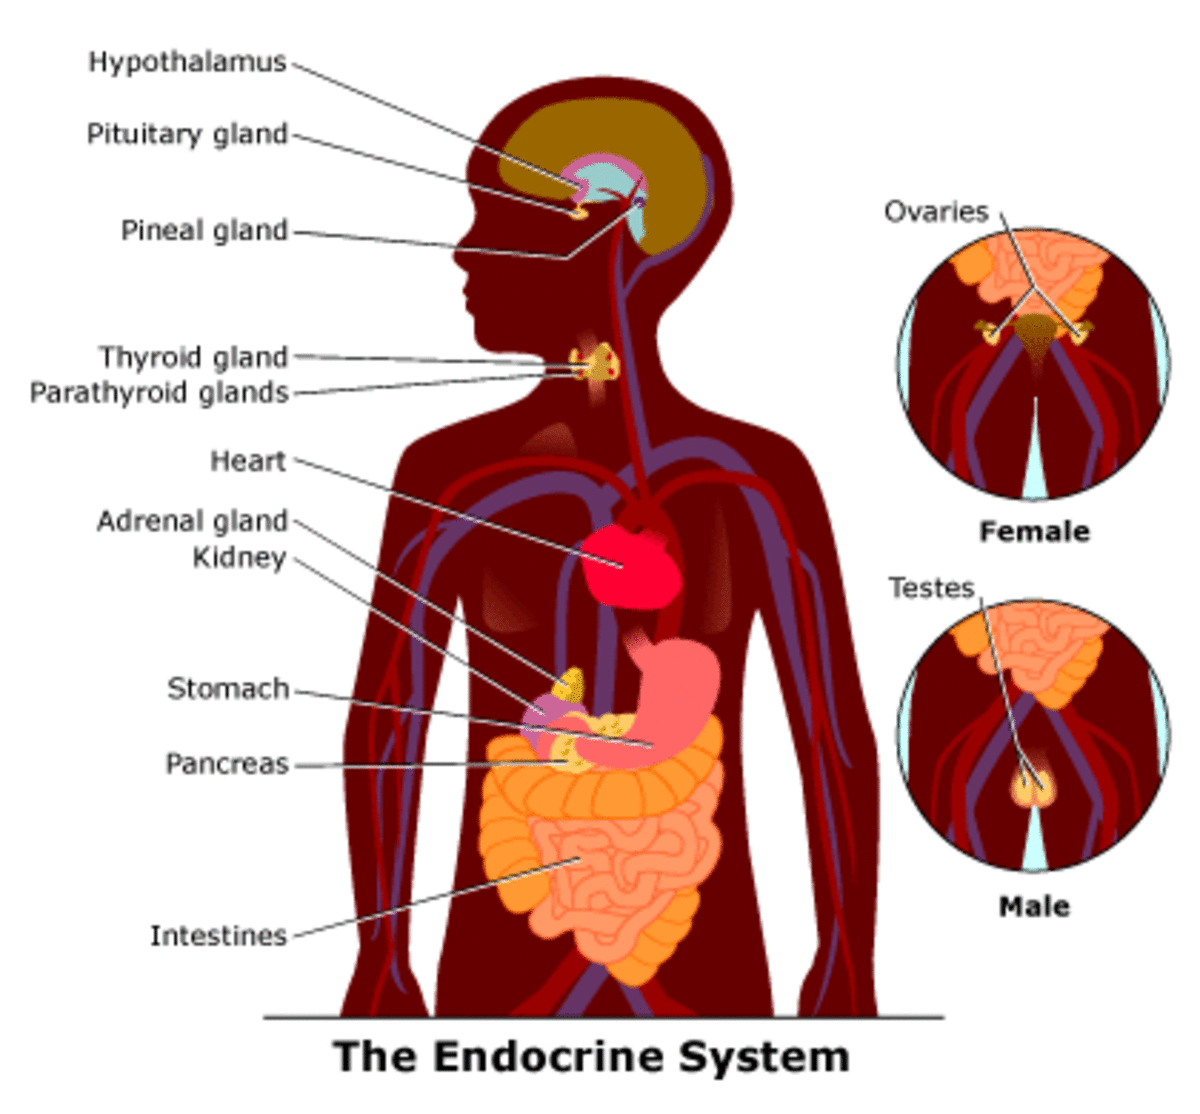 The Heart as an Endocrine Gland